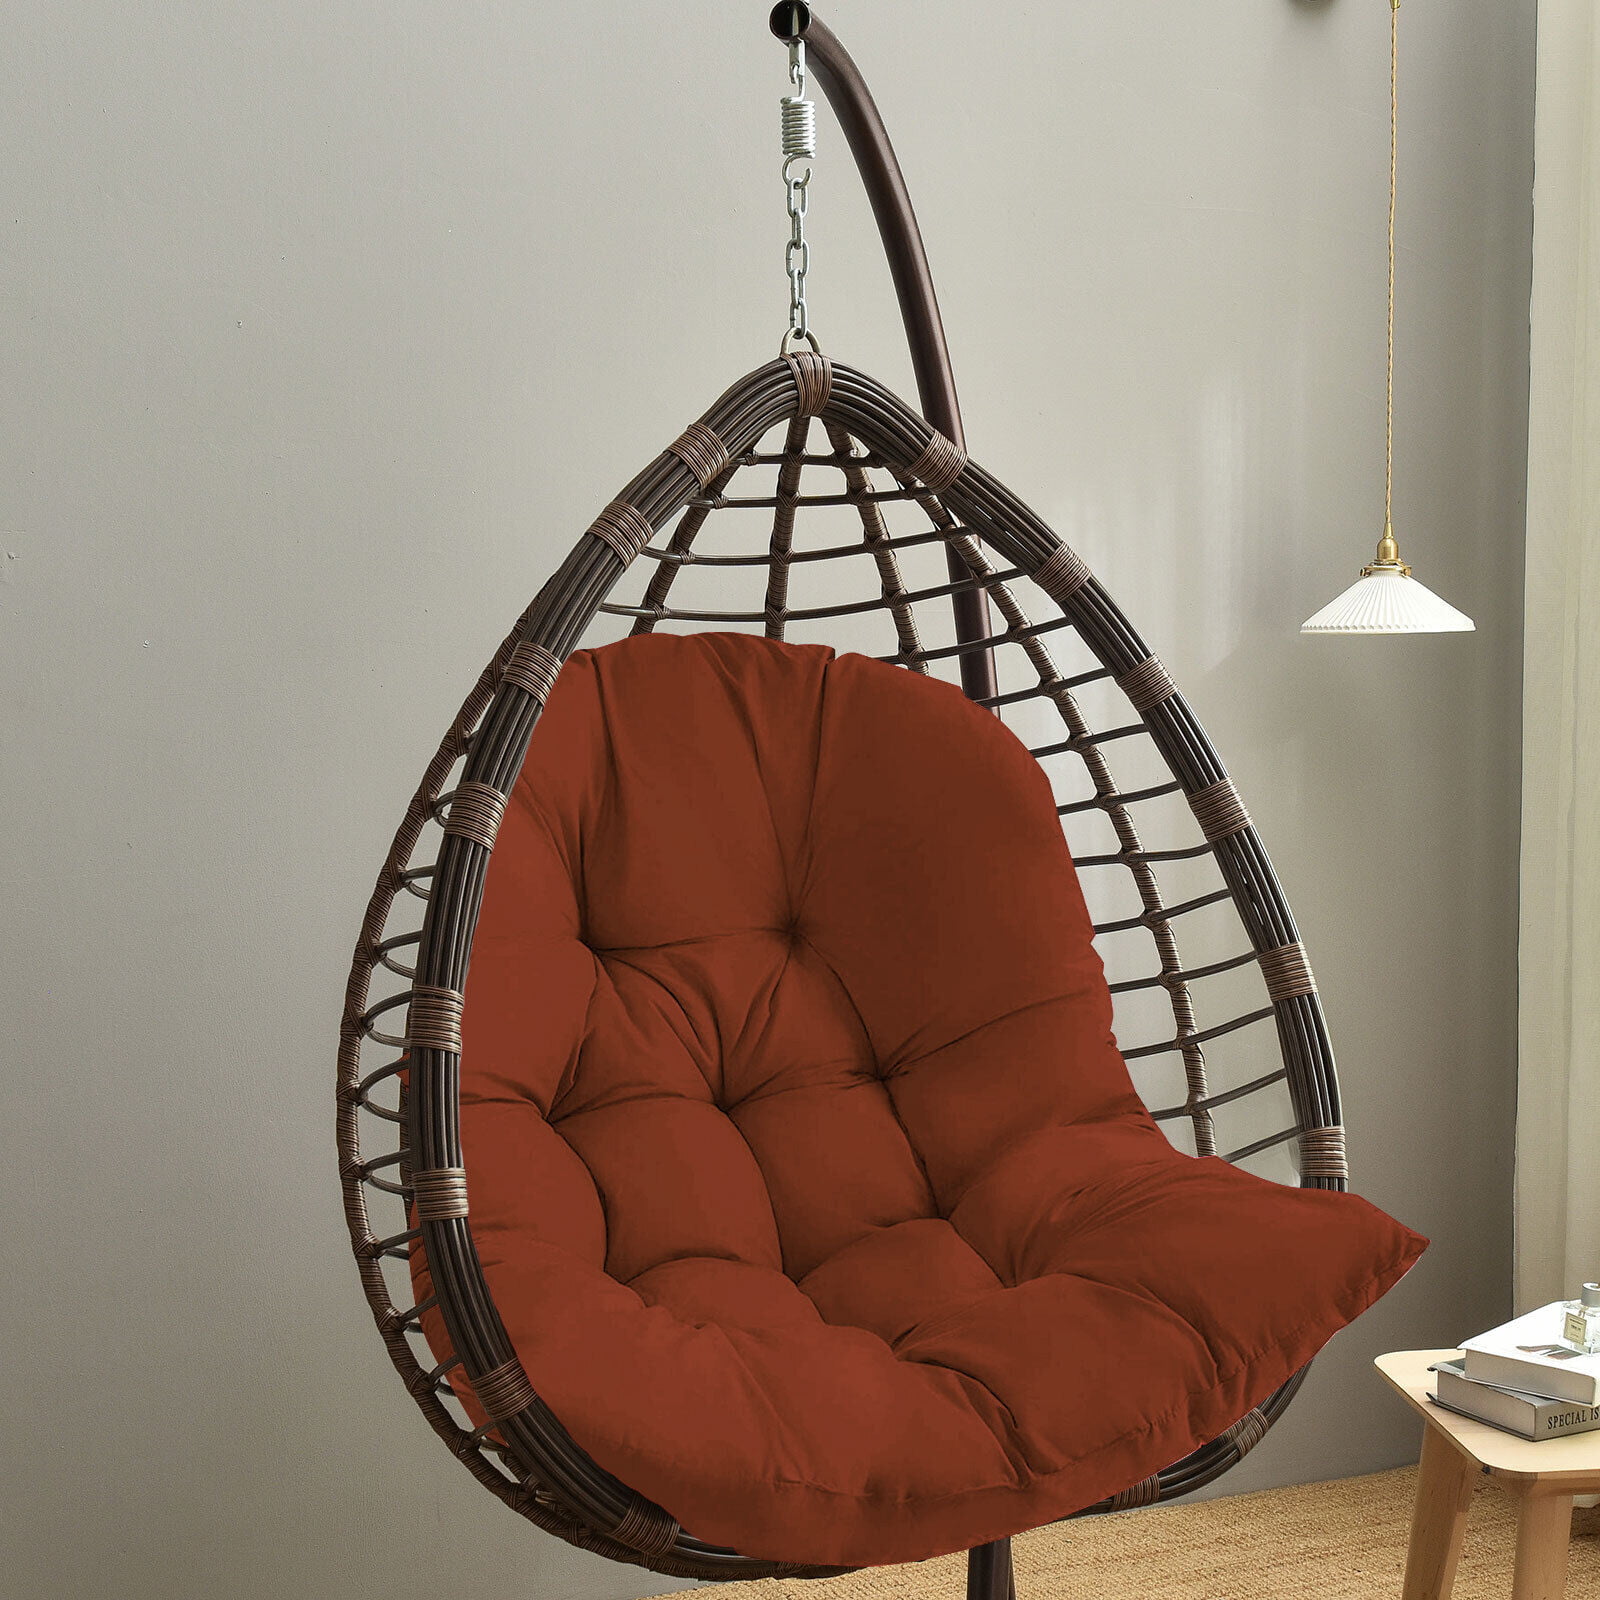 OA&WA Hanging Basket Chair Cushions, Large Seat Cushion Waterproof Hanging  Egg Hammock Swing Chair Pads Soft Chair Back Solid Color (Color : Gray